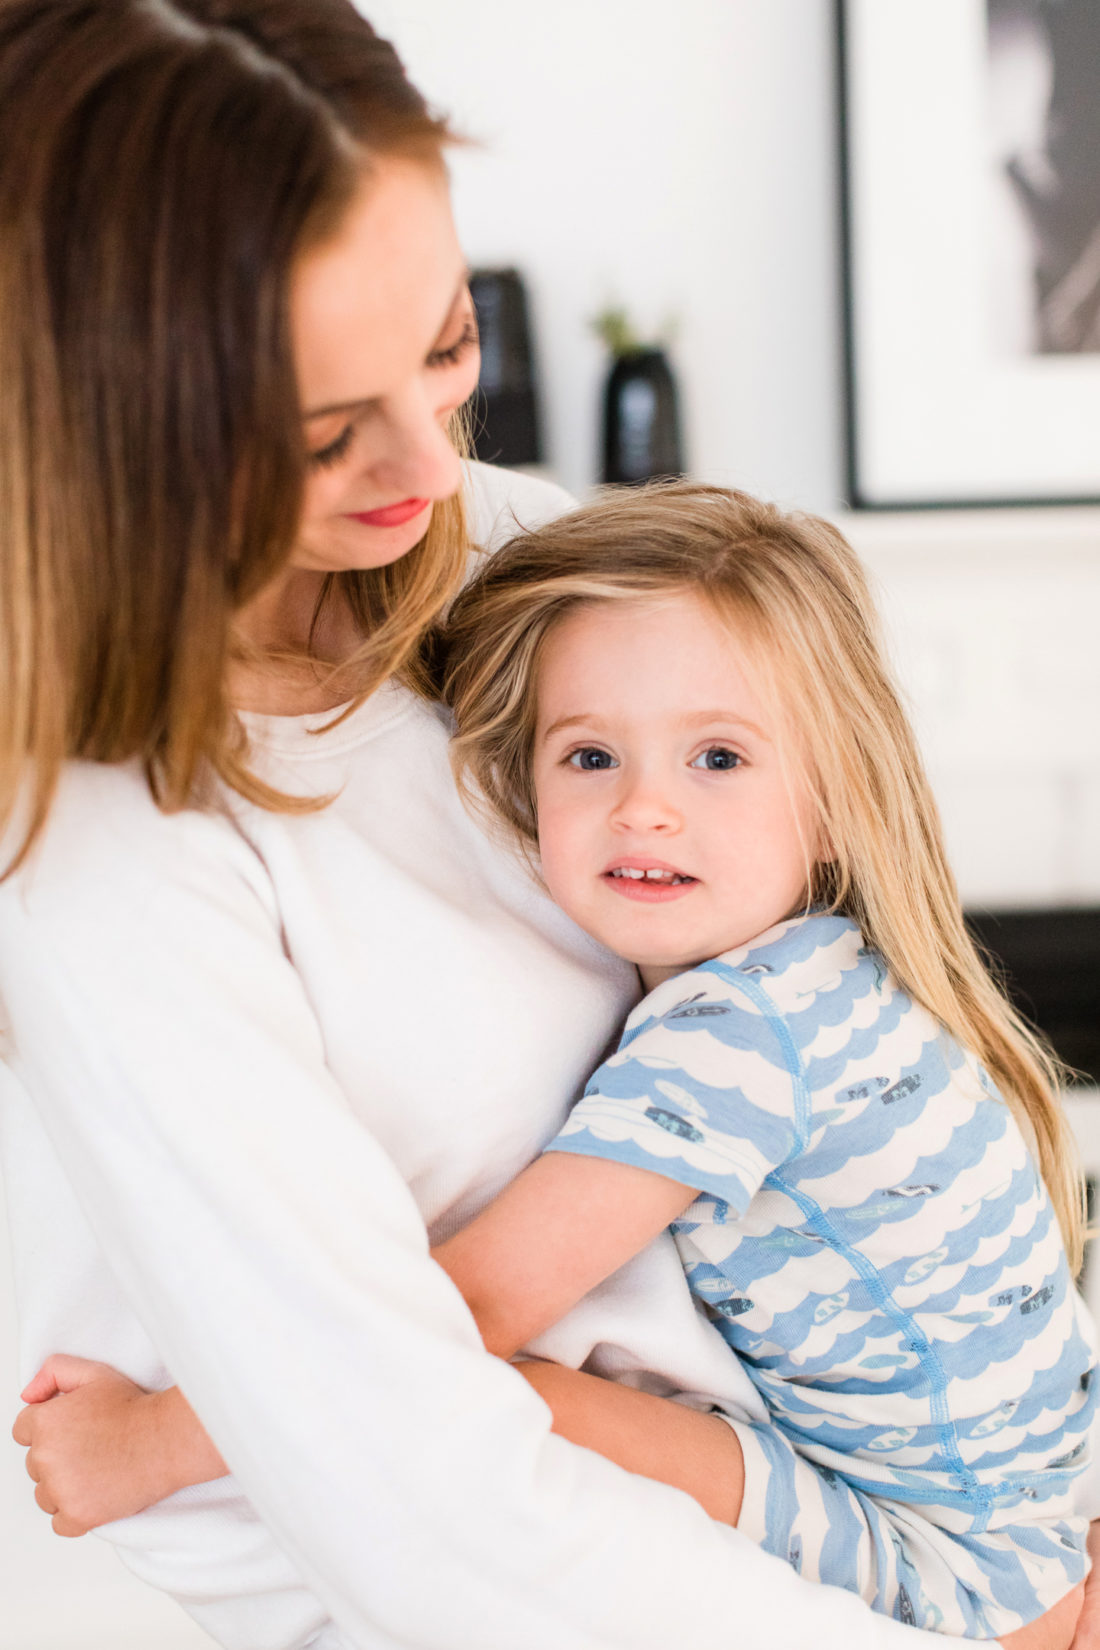 Eva Amurri Martino wears pajamas and snuggles three year old daughter Marlowe in the kitchen of her Connecticut home